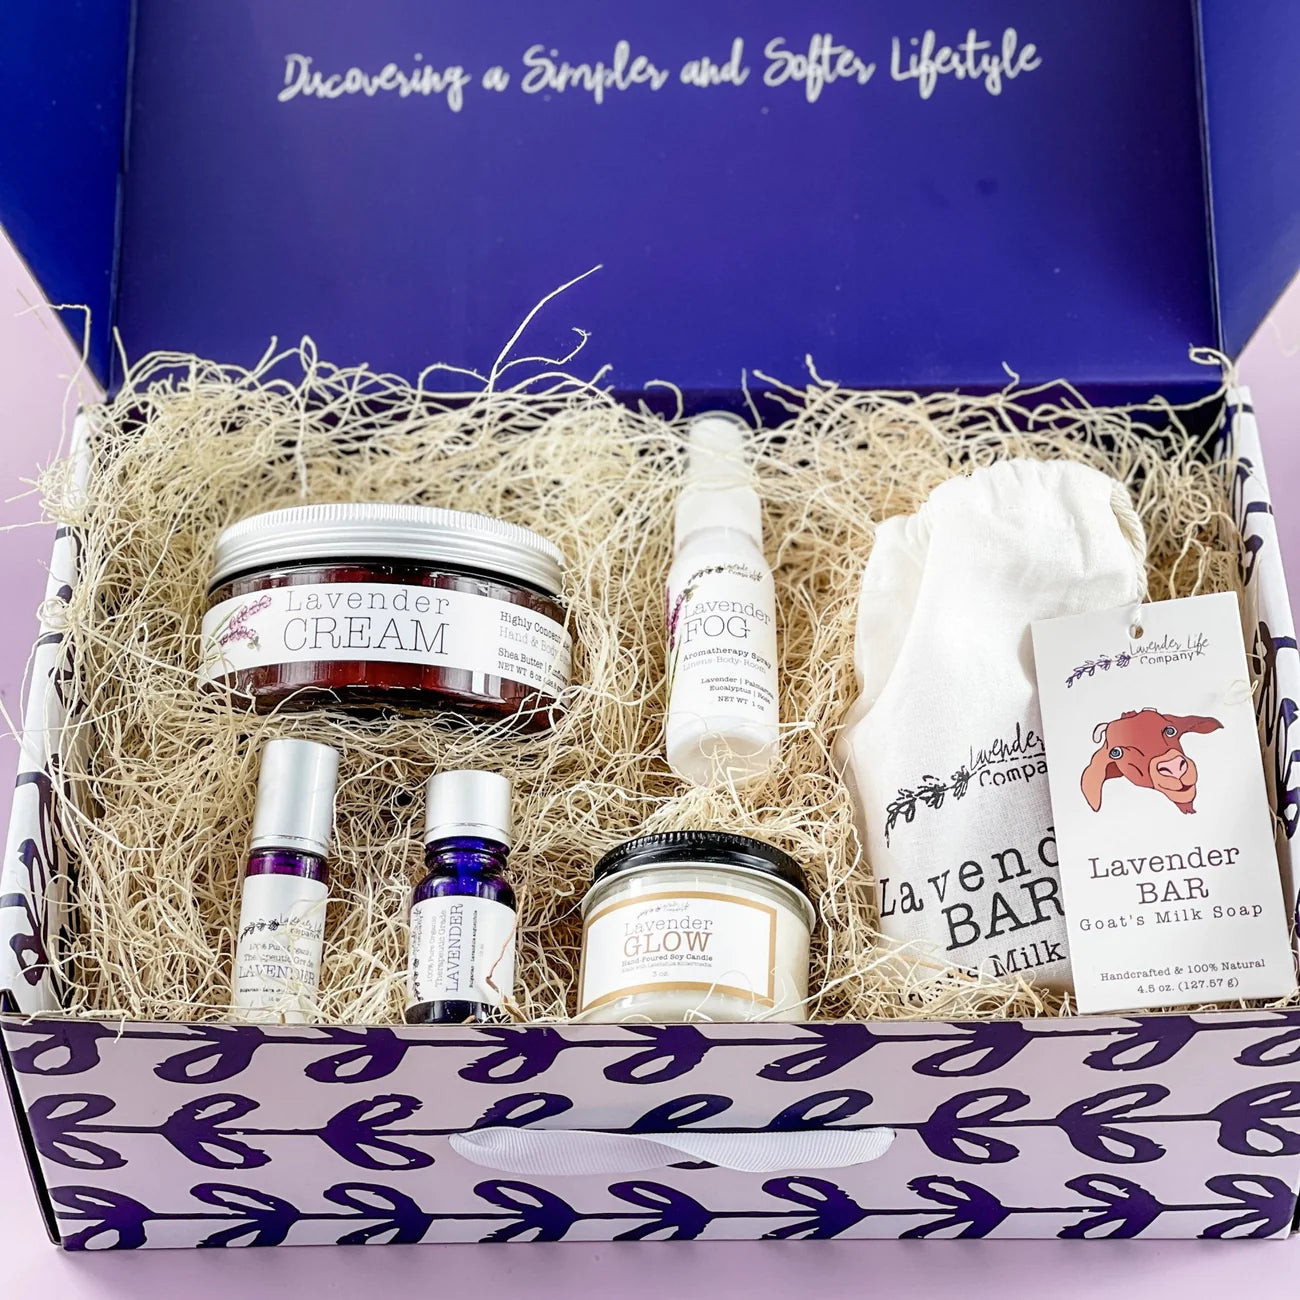 Naturally Beautiful: Organic Lavender Beauty Products to Delight Your Loved Ones